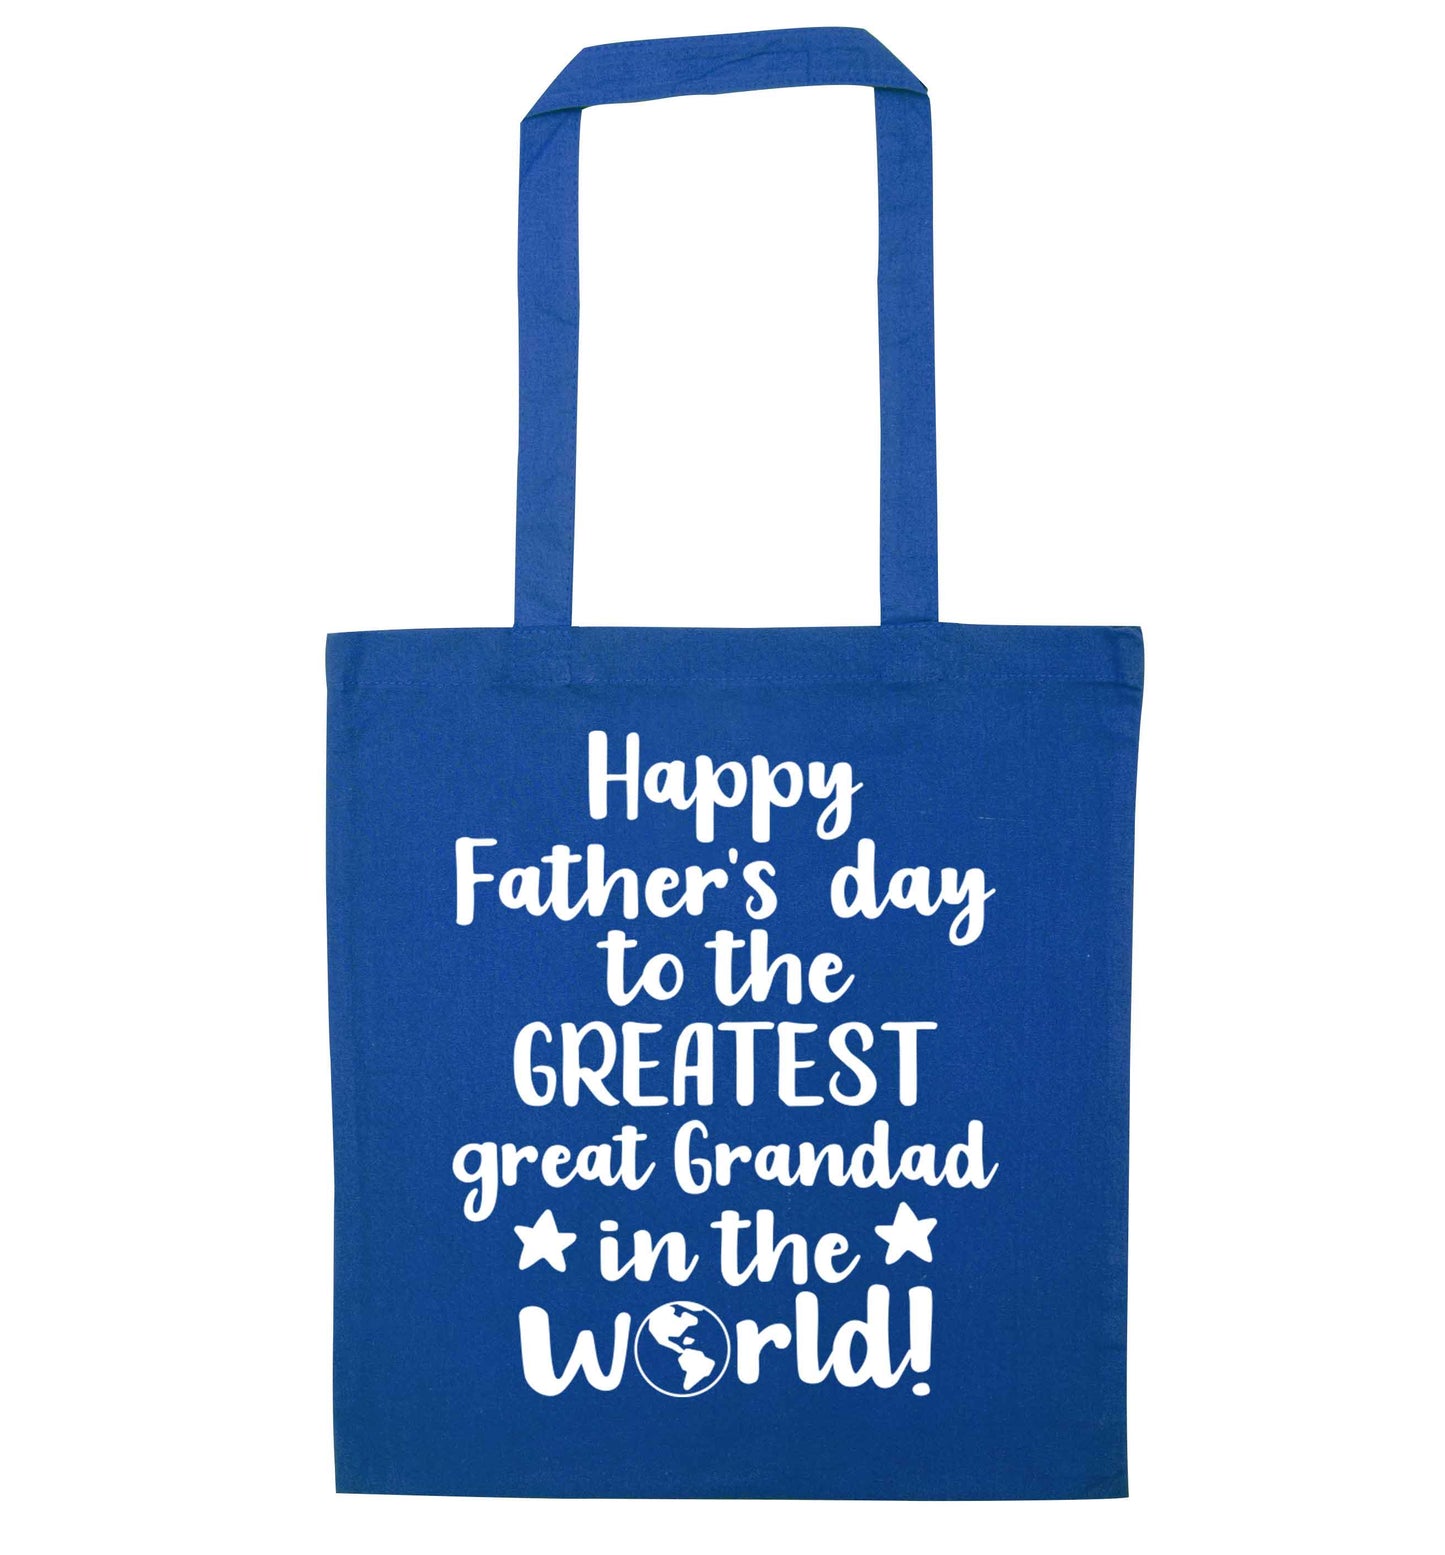 Happy Father's day to the greatest great grandad in the world blue tote bag